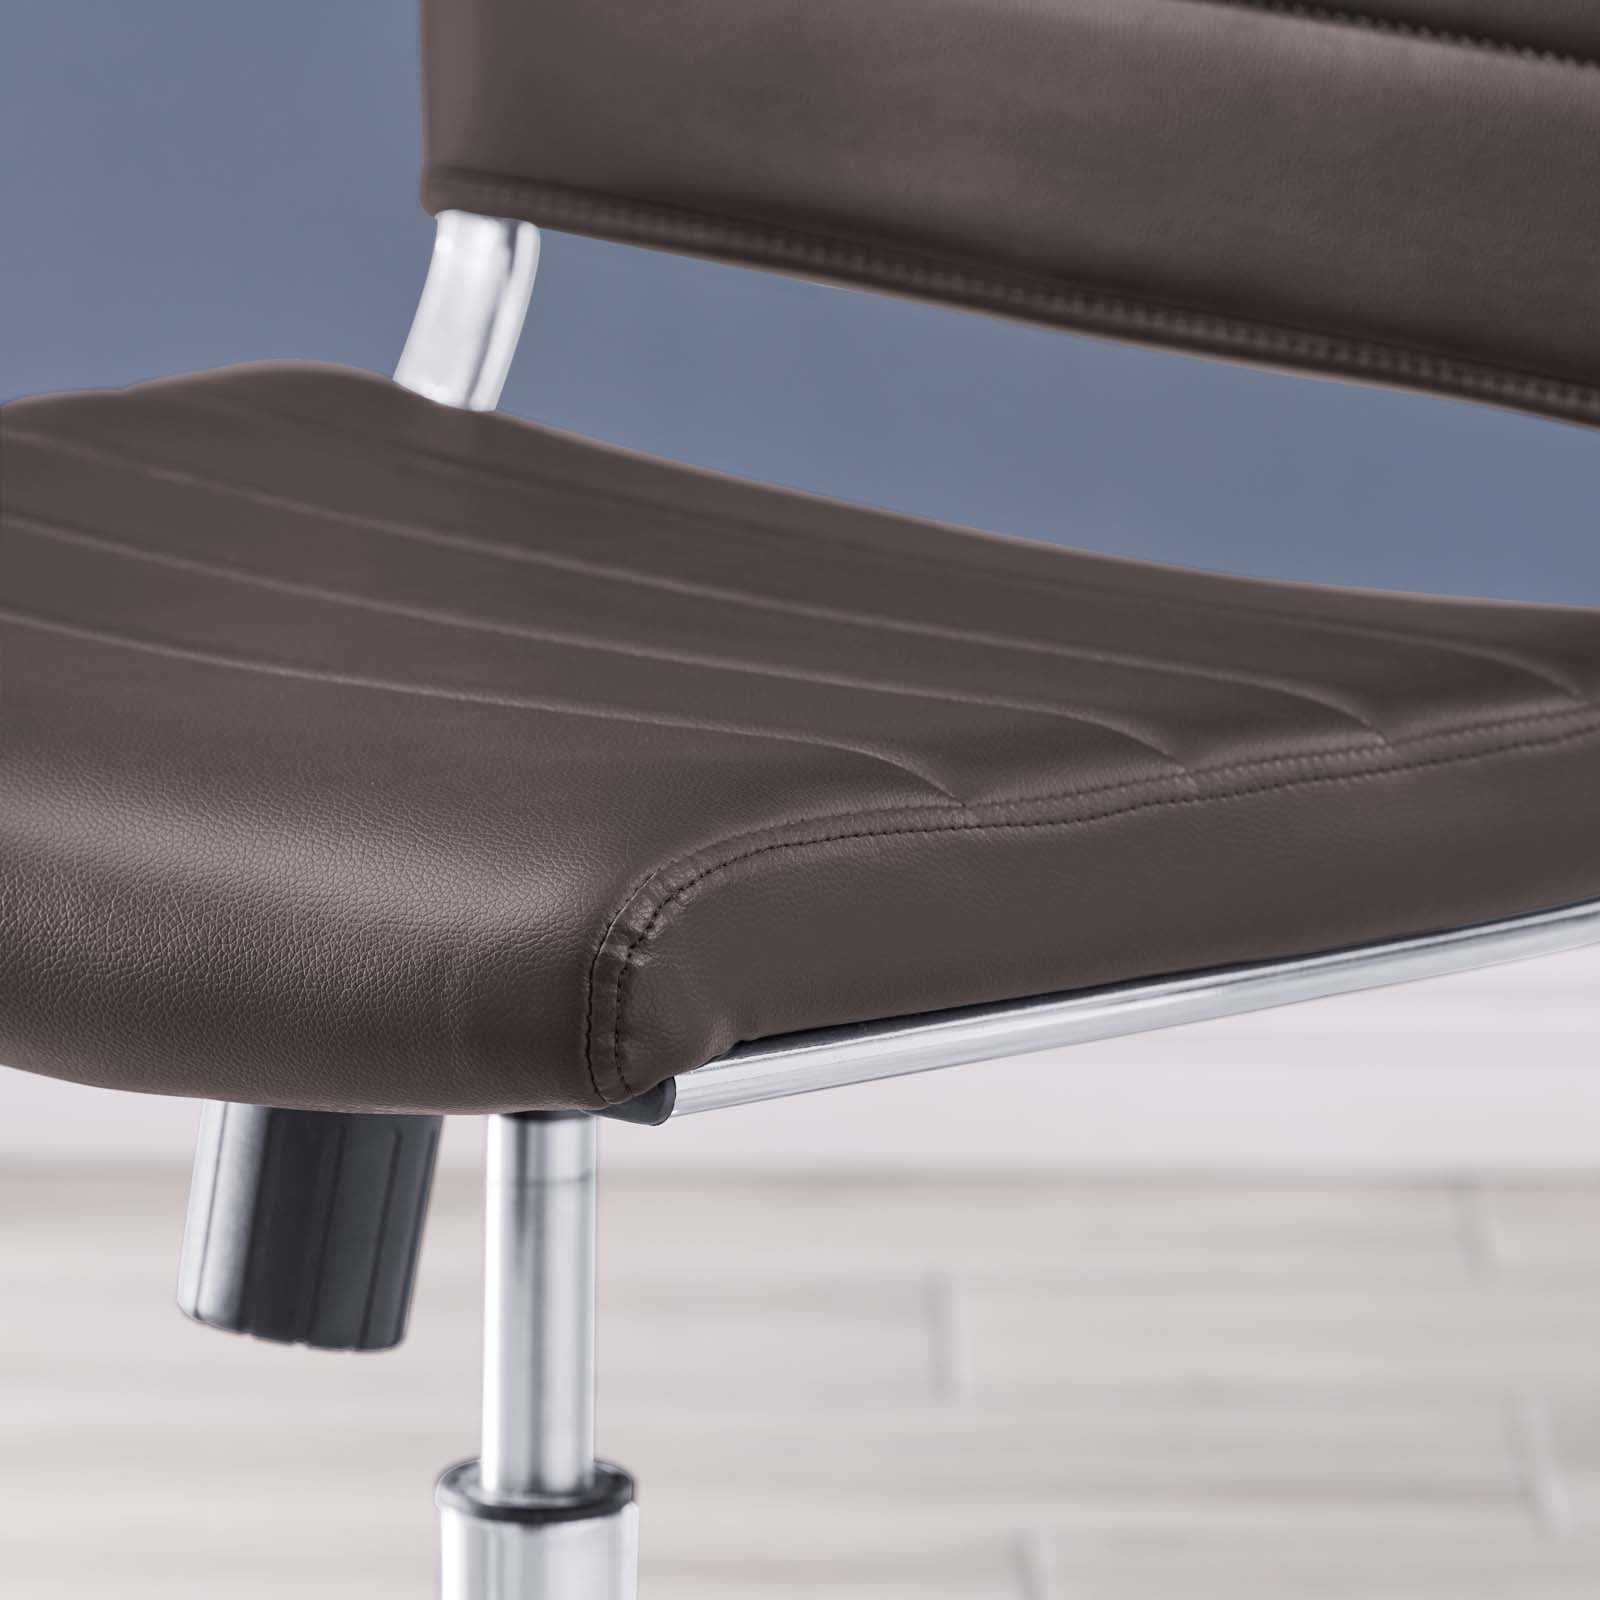 Deluxe Armless Mid Back Office Chair